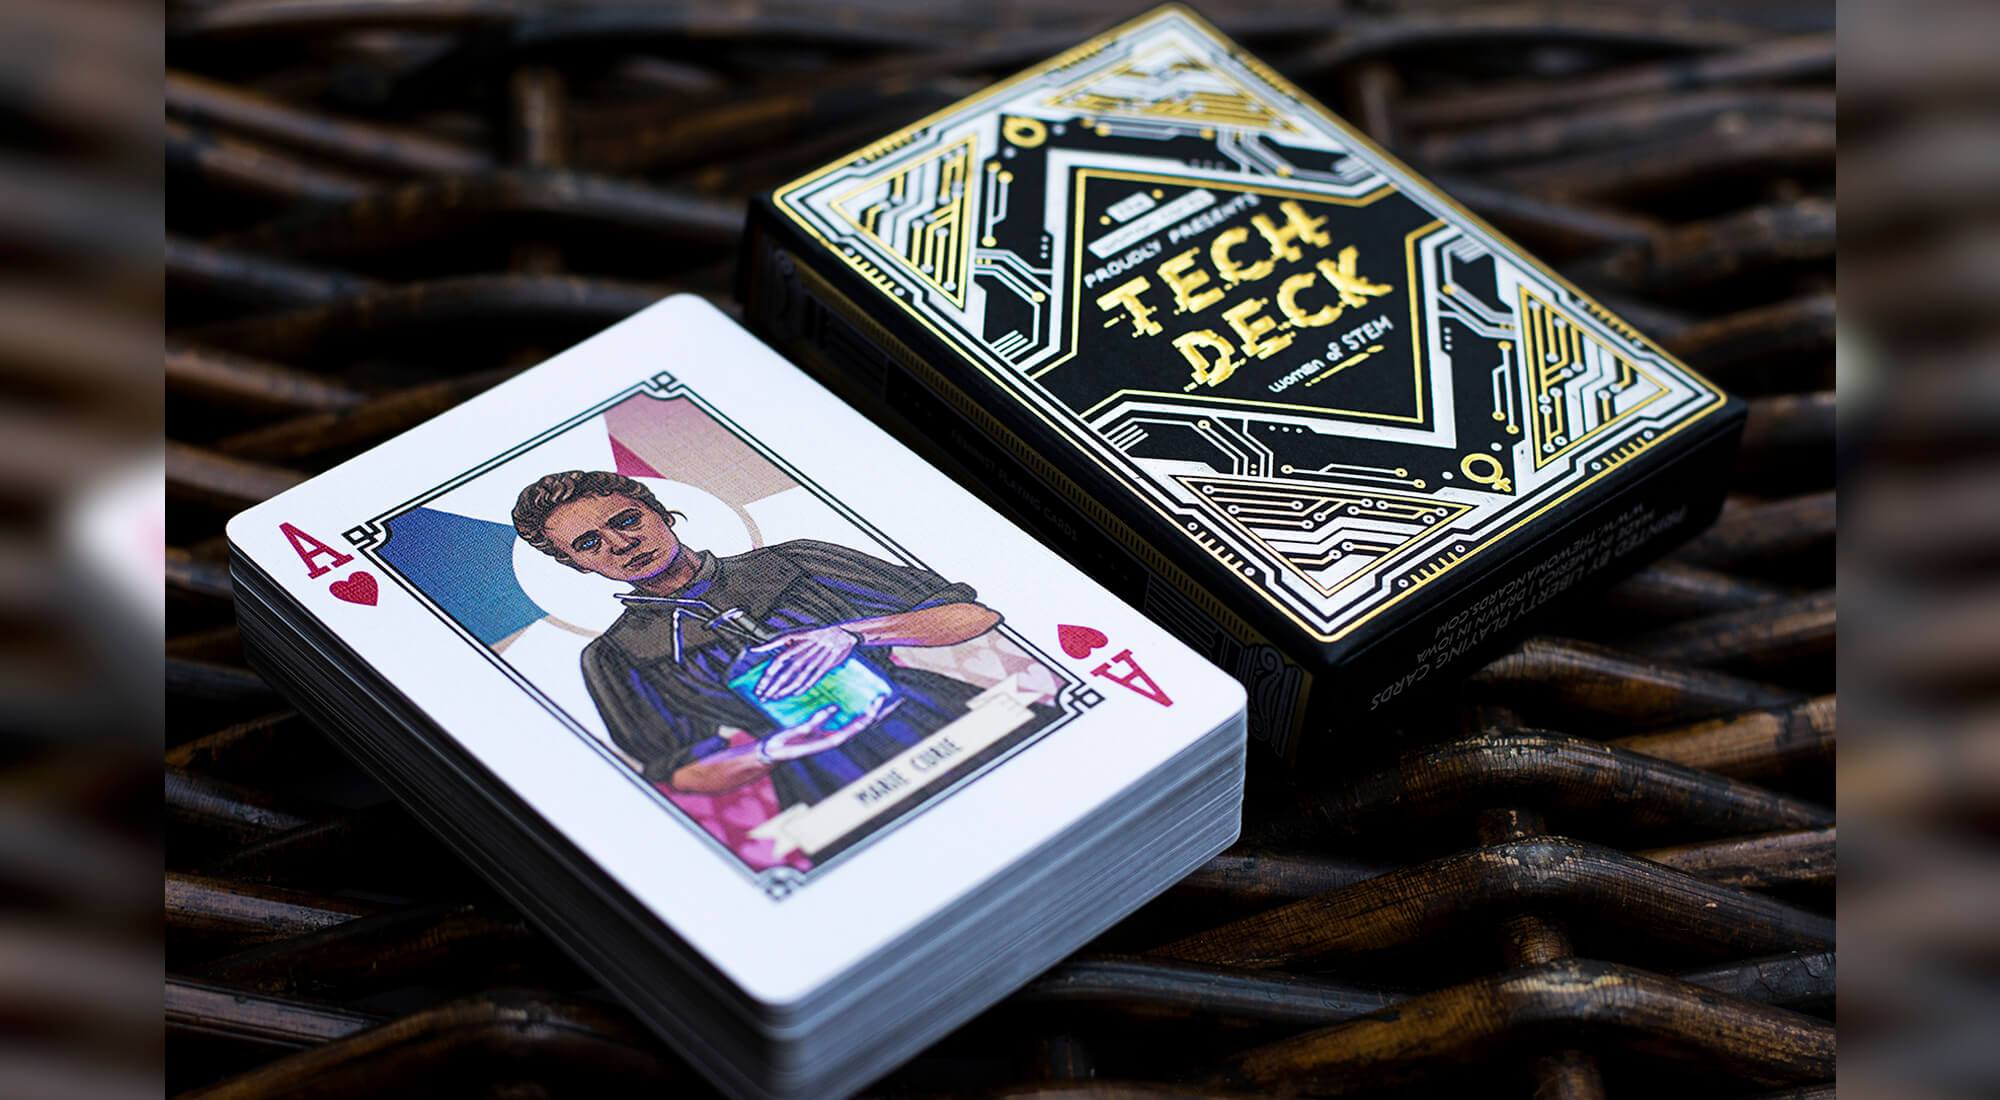 Tech Deck Playing Cards - Celebrating pioneers in the fields of science, technology, engineering and math